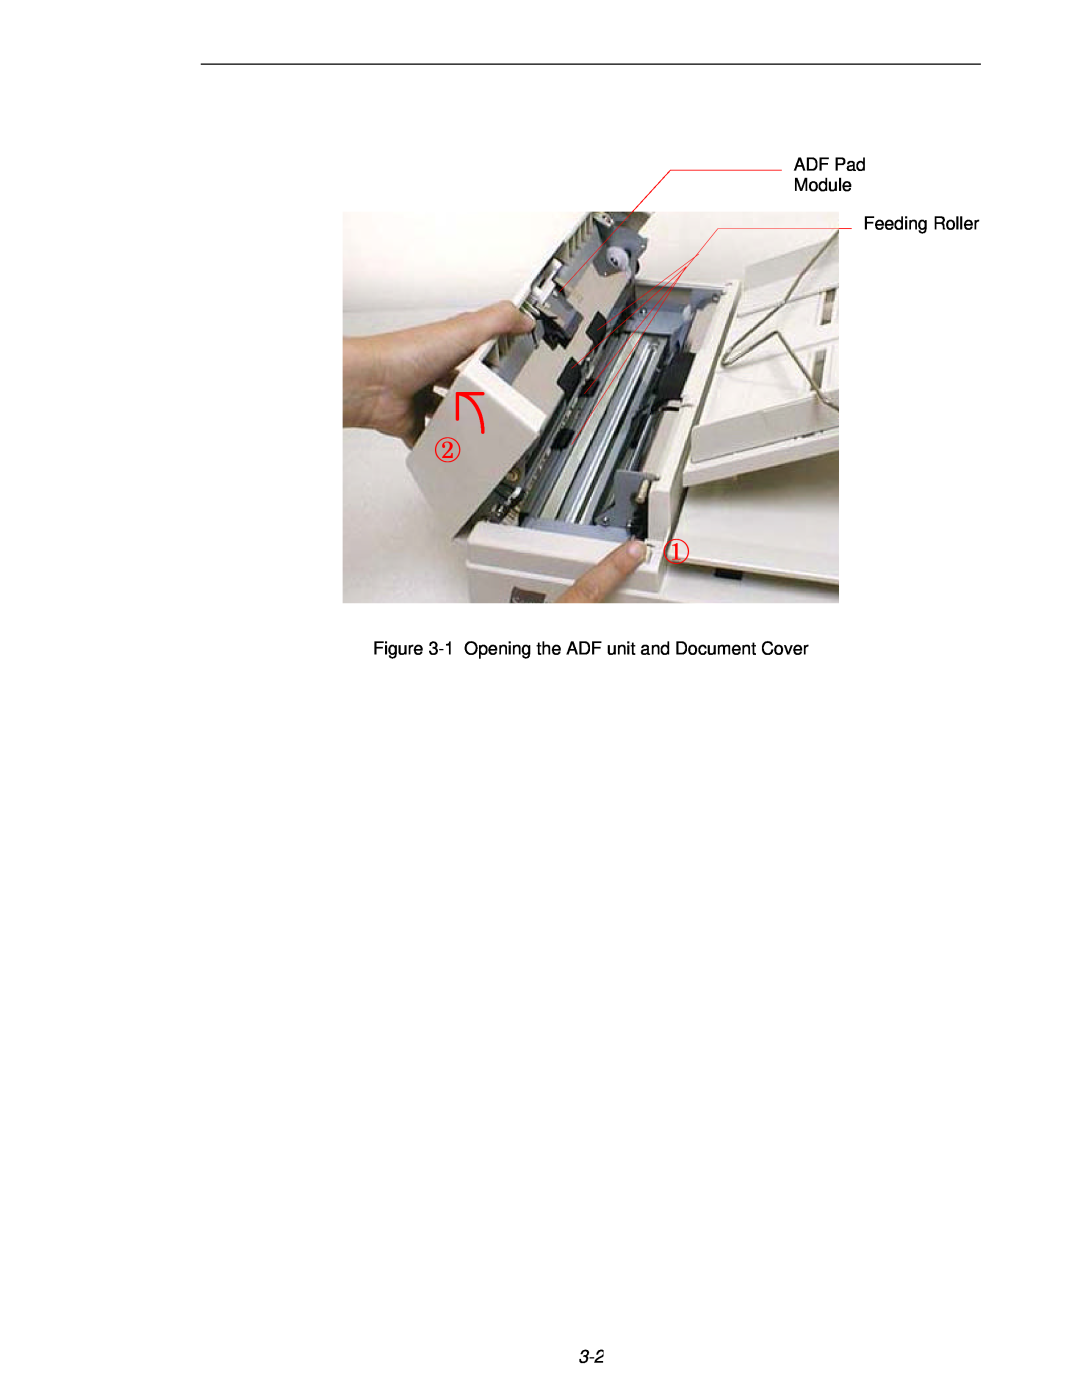 Fujitsu 620C user manual ADF Pad Module Feeding Roller, 1 Opening the ADF unit and Document Cover 